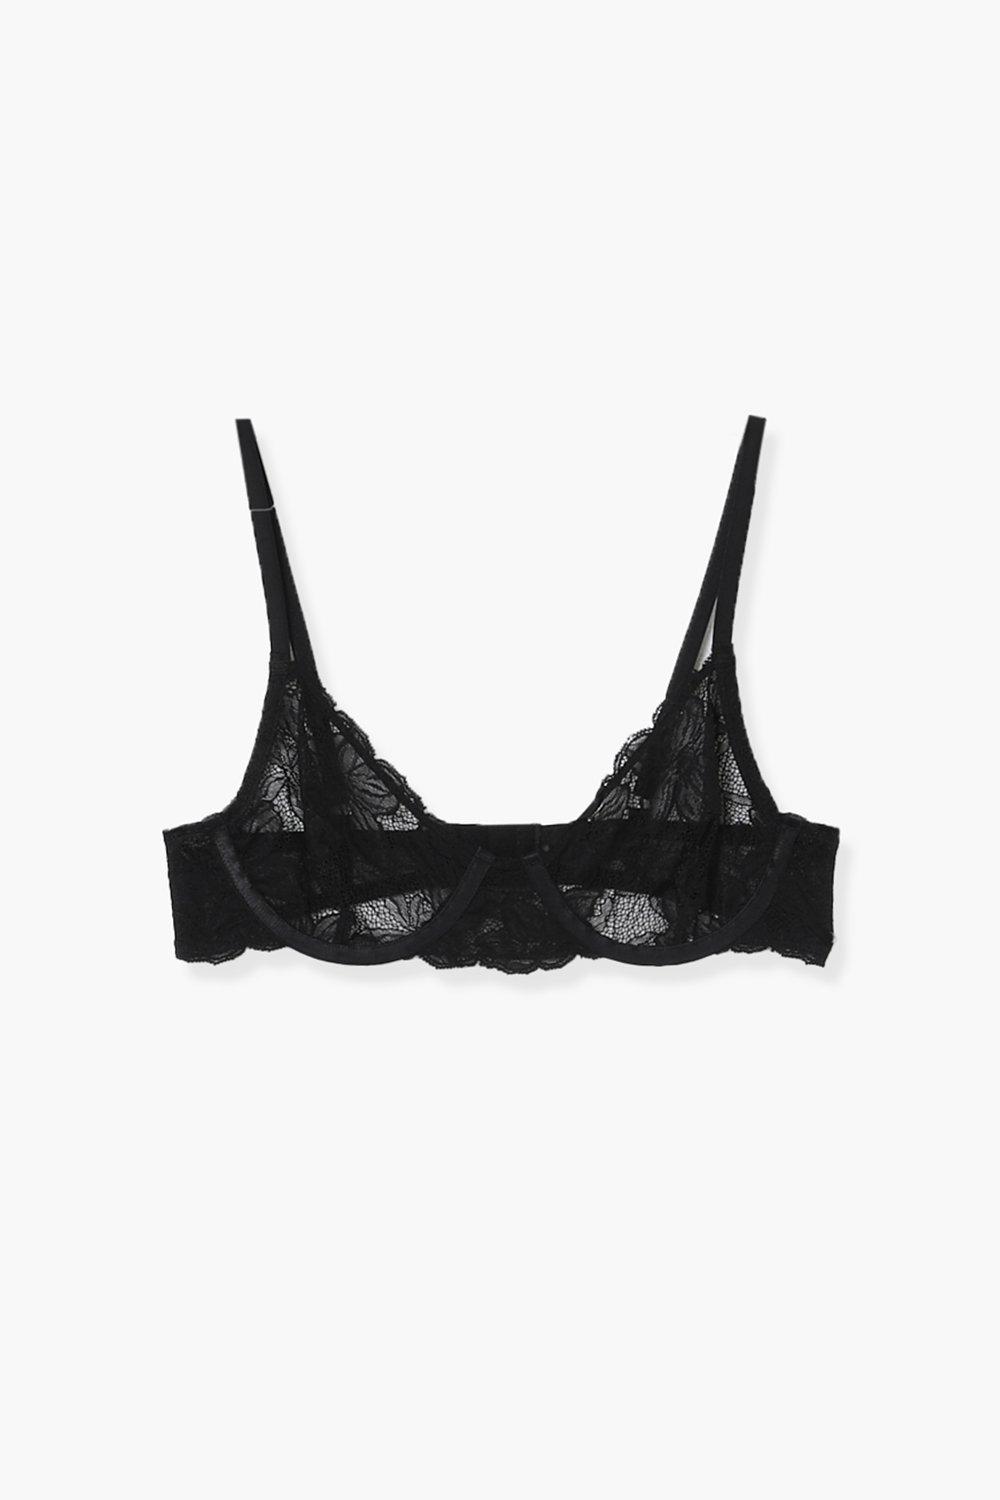 Clearance Floral Lace Underwire Bra QIPOPIQ Women's Sexy Lace Bra Sexy  Gathering Large Chest Show Small Sponge Free Thin Comfortable Large Size